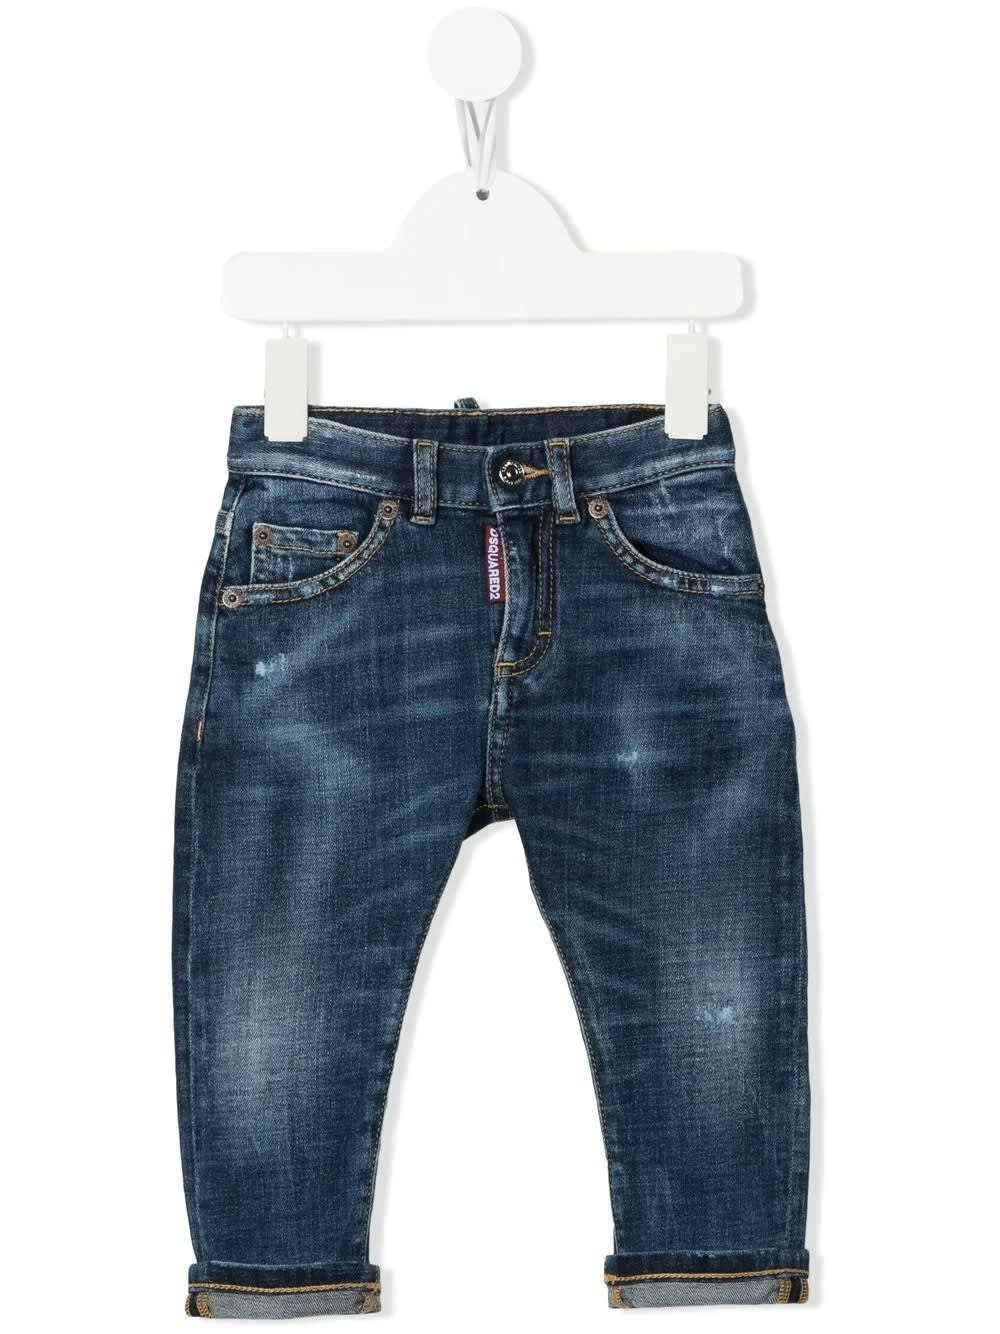 Baby Blue dsquared2 Ceresio 9, Milano Slim Fit Jeans